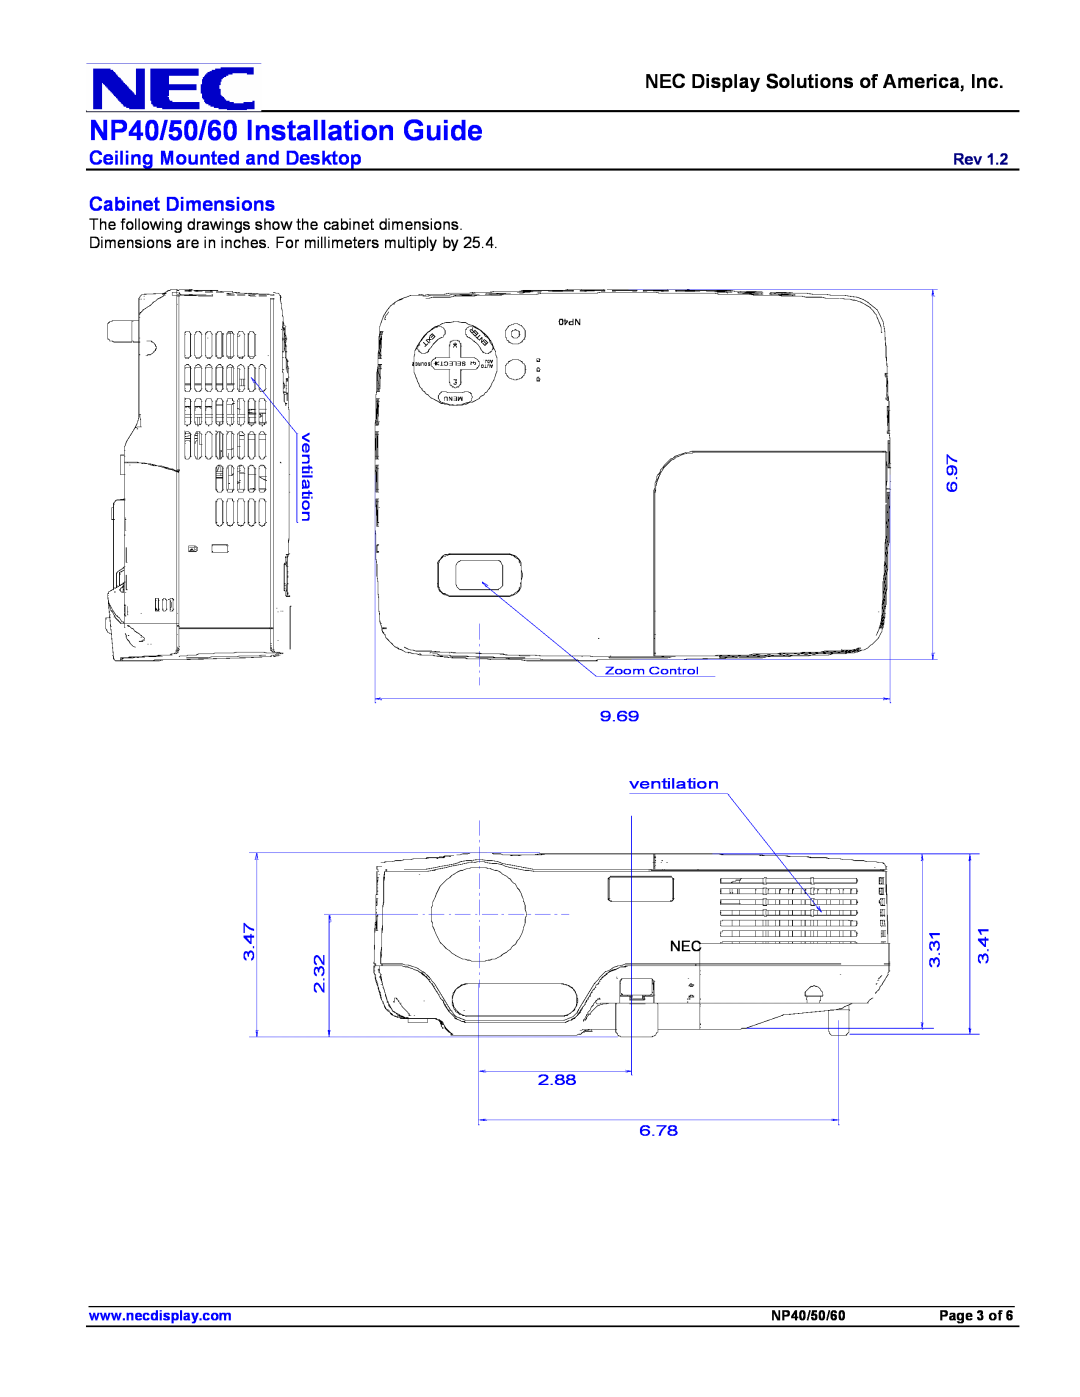 NEC Cabinet Dimensions, NP40/50/60 Installation Guide, NEC Display Solutions of America, Inc, ventilation, 3.47, 2.32 